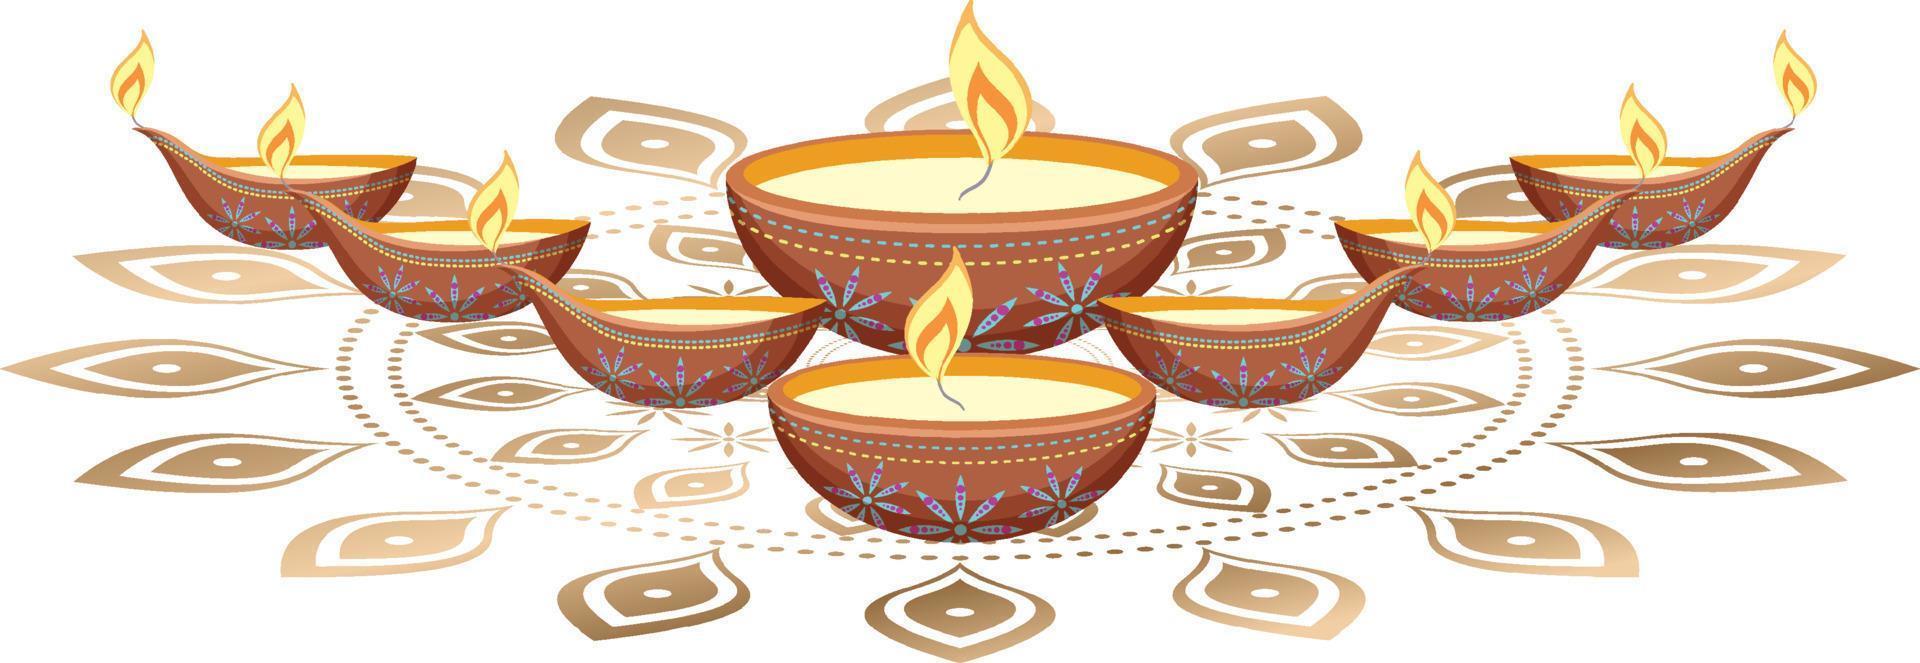 Diwali light candles on white background vector